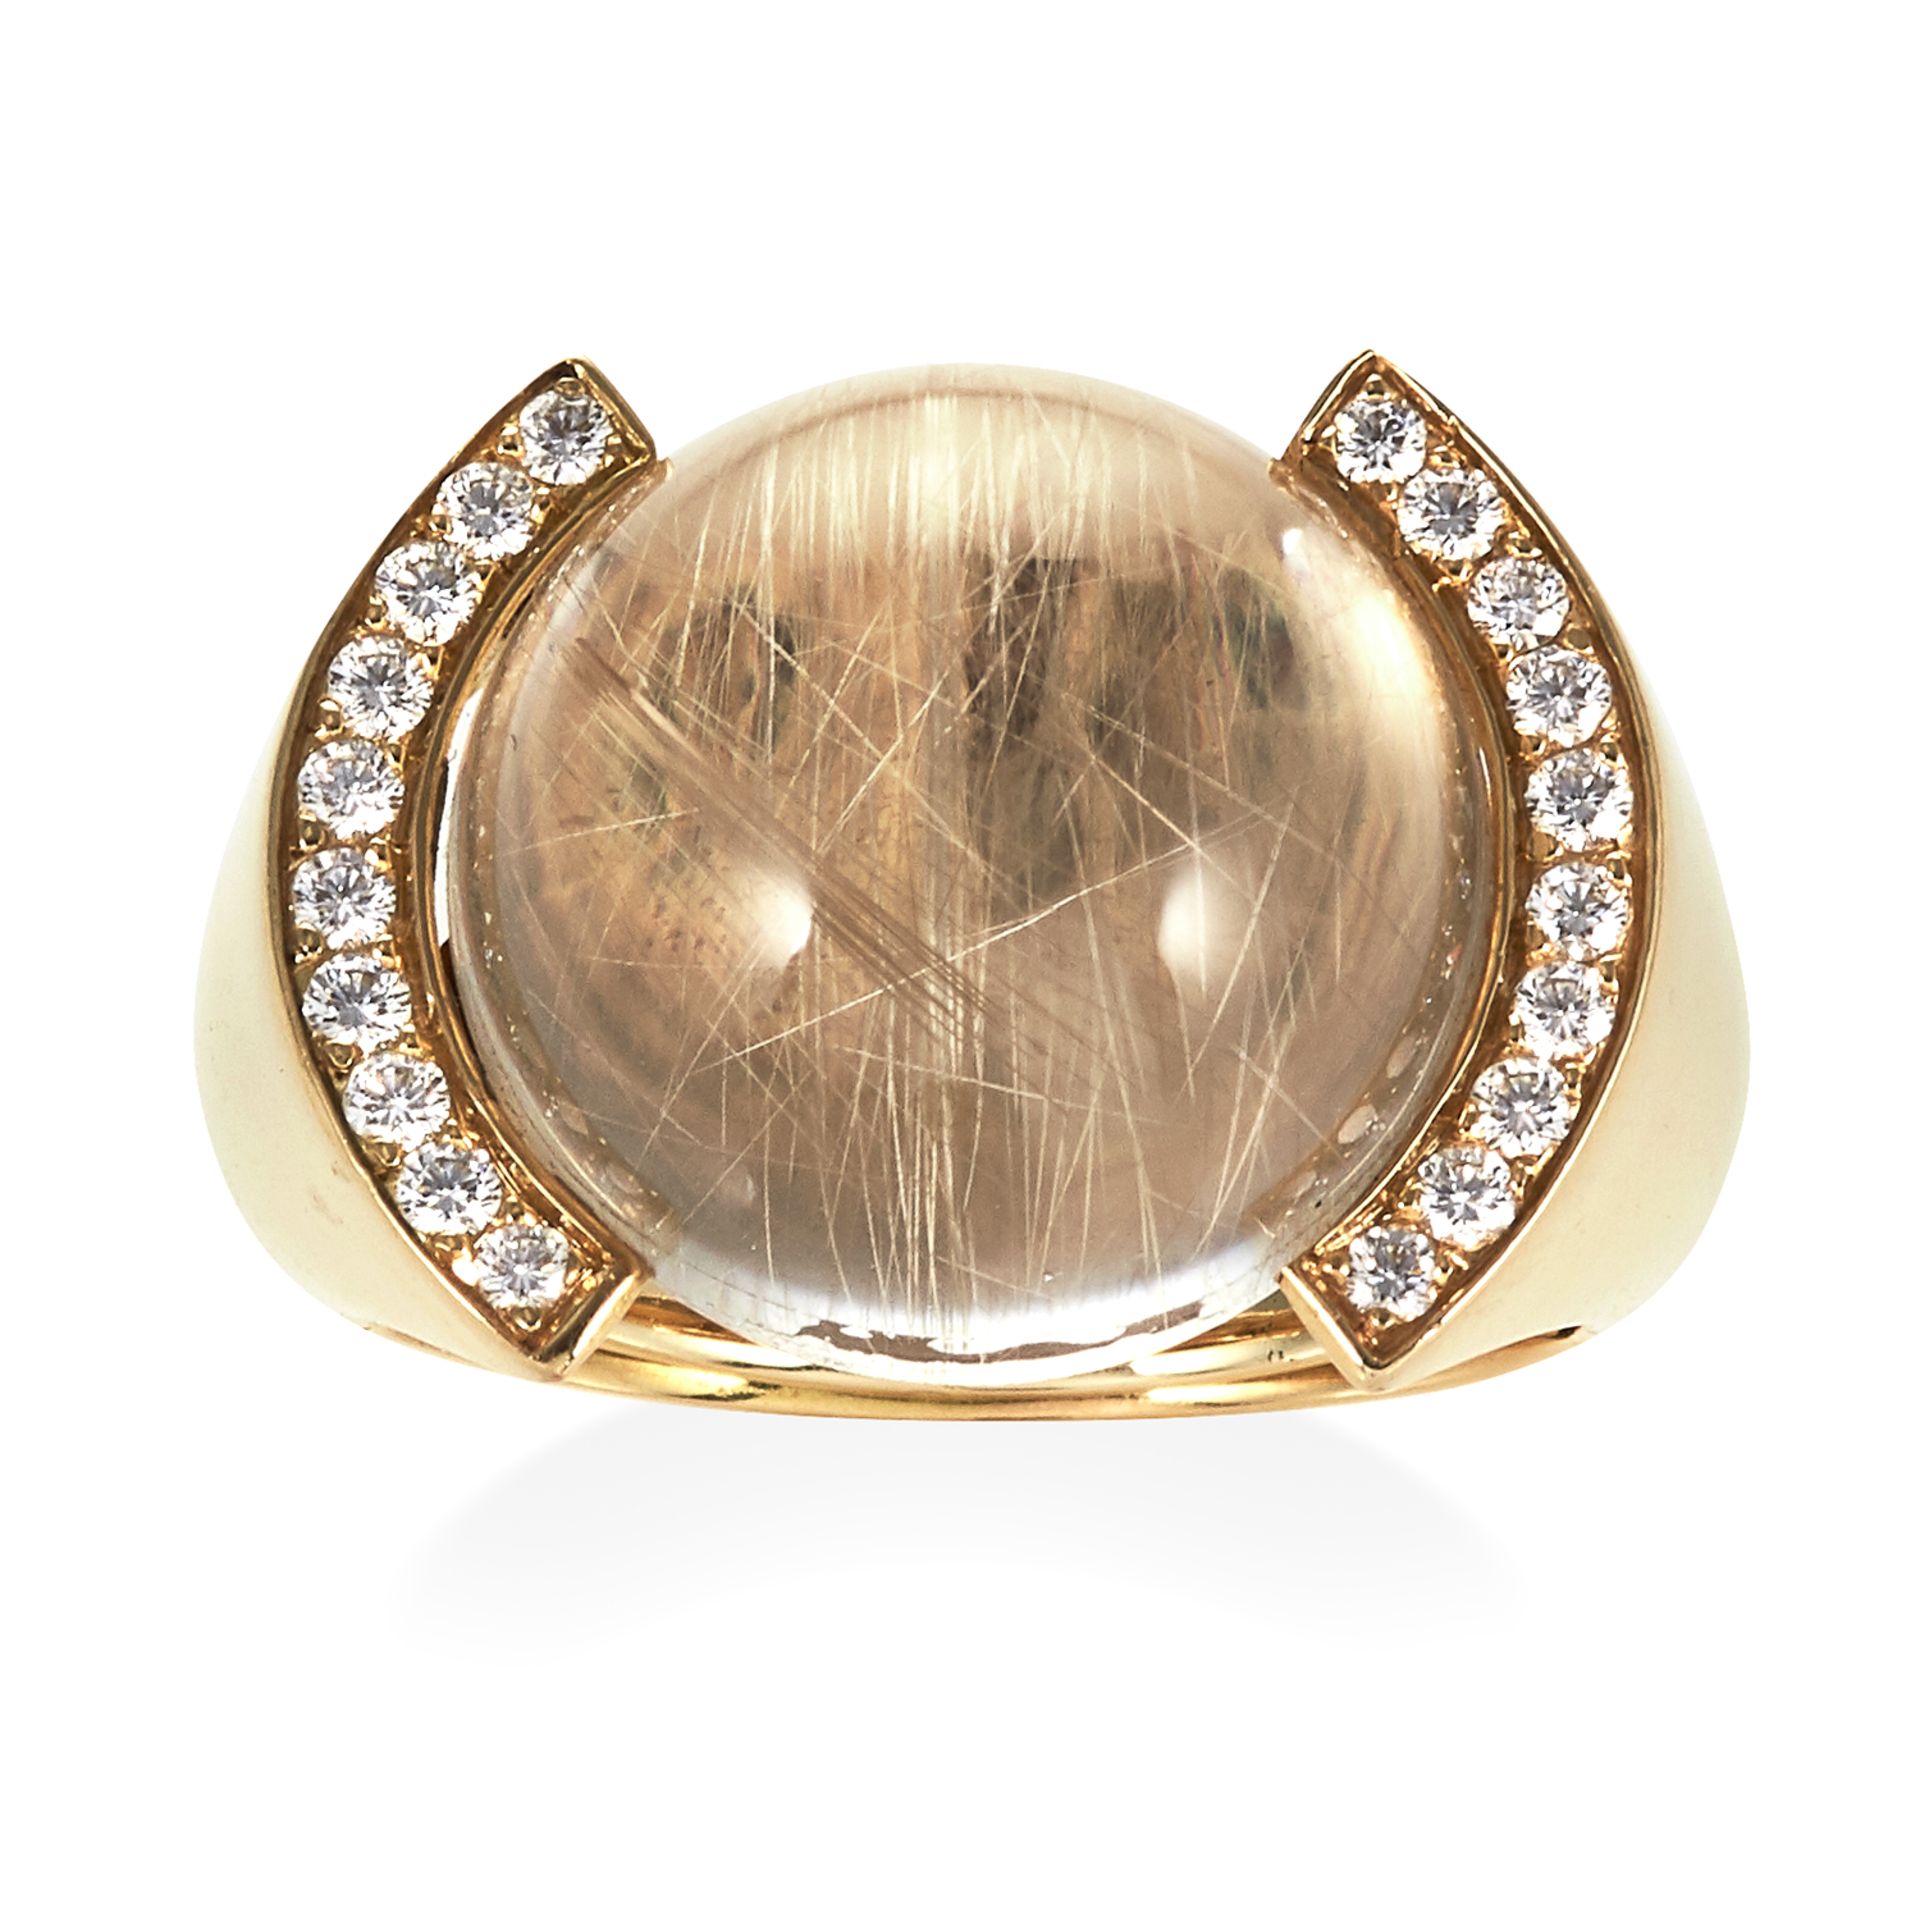 A VINTAGE RUTILE QUARTZ AND DIAMOND DRESS RING, CARTIER in 18ct yellow gold, set with a central